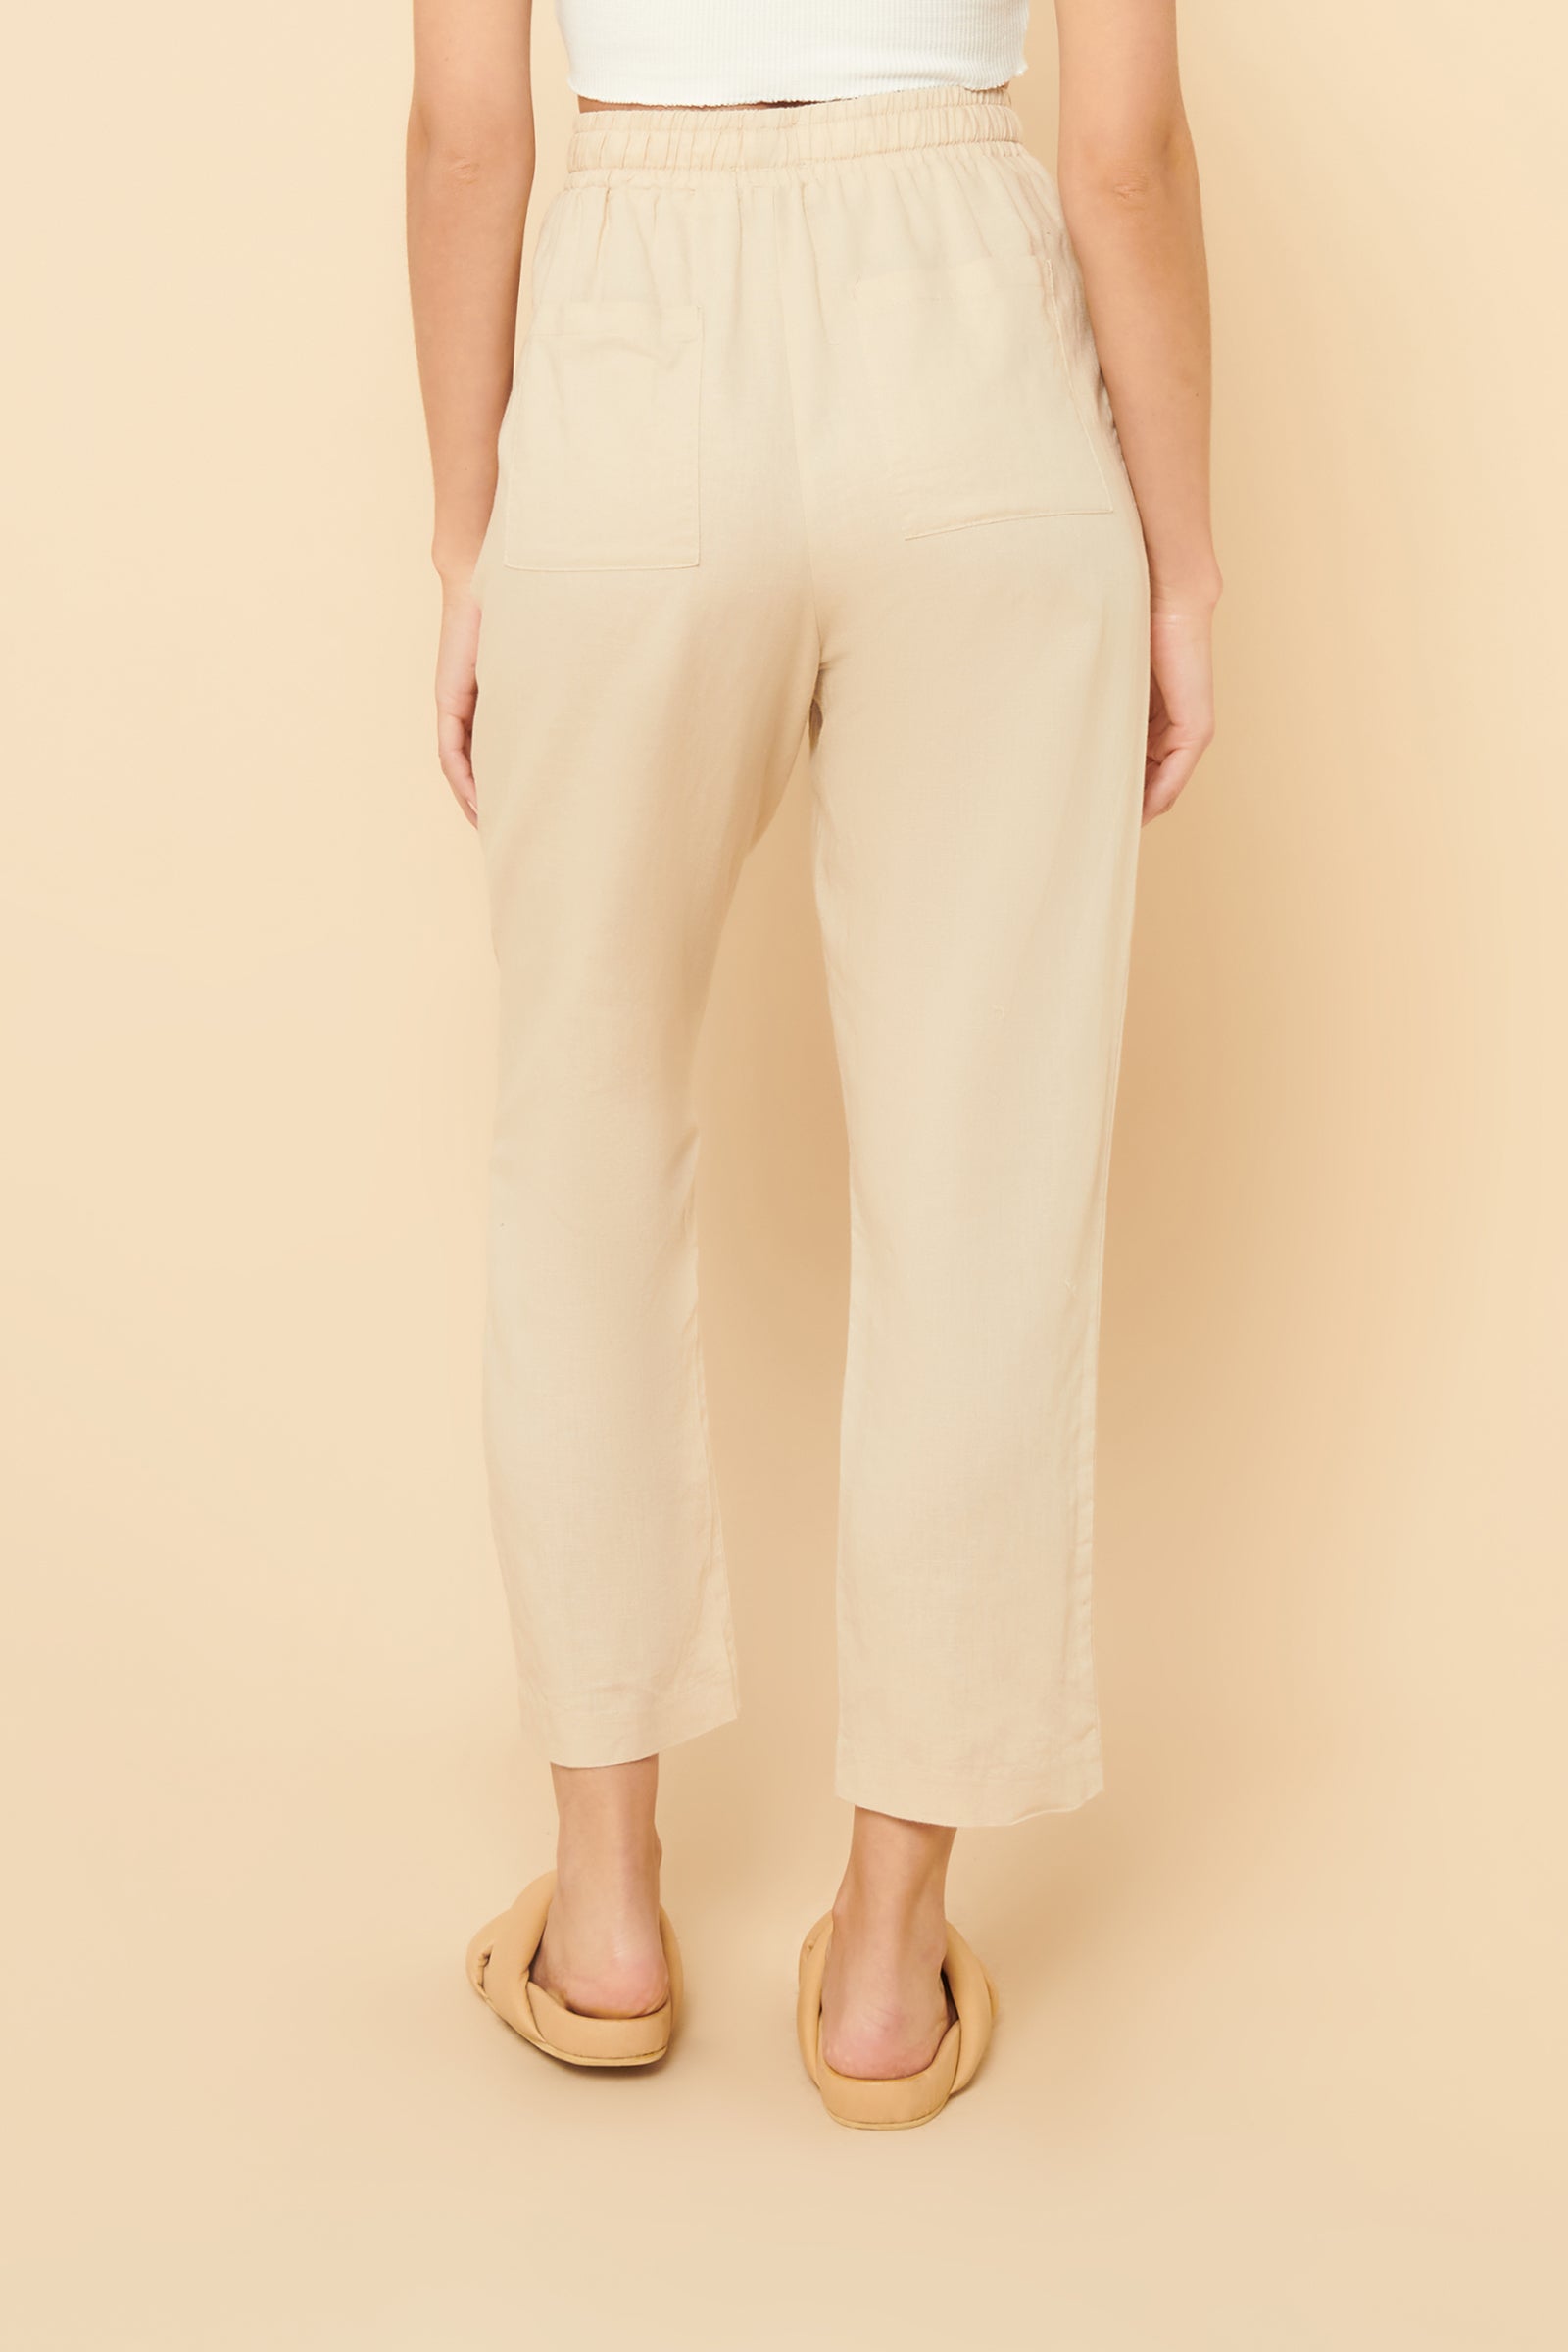 Nude Lucy Nude Classic Pant In a Yellow Sand Colour